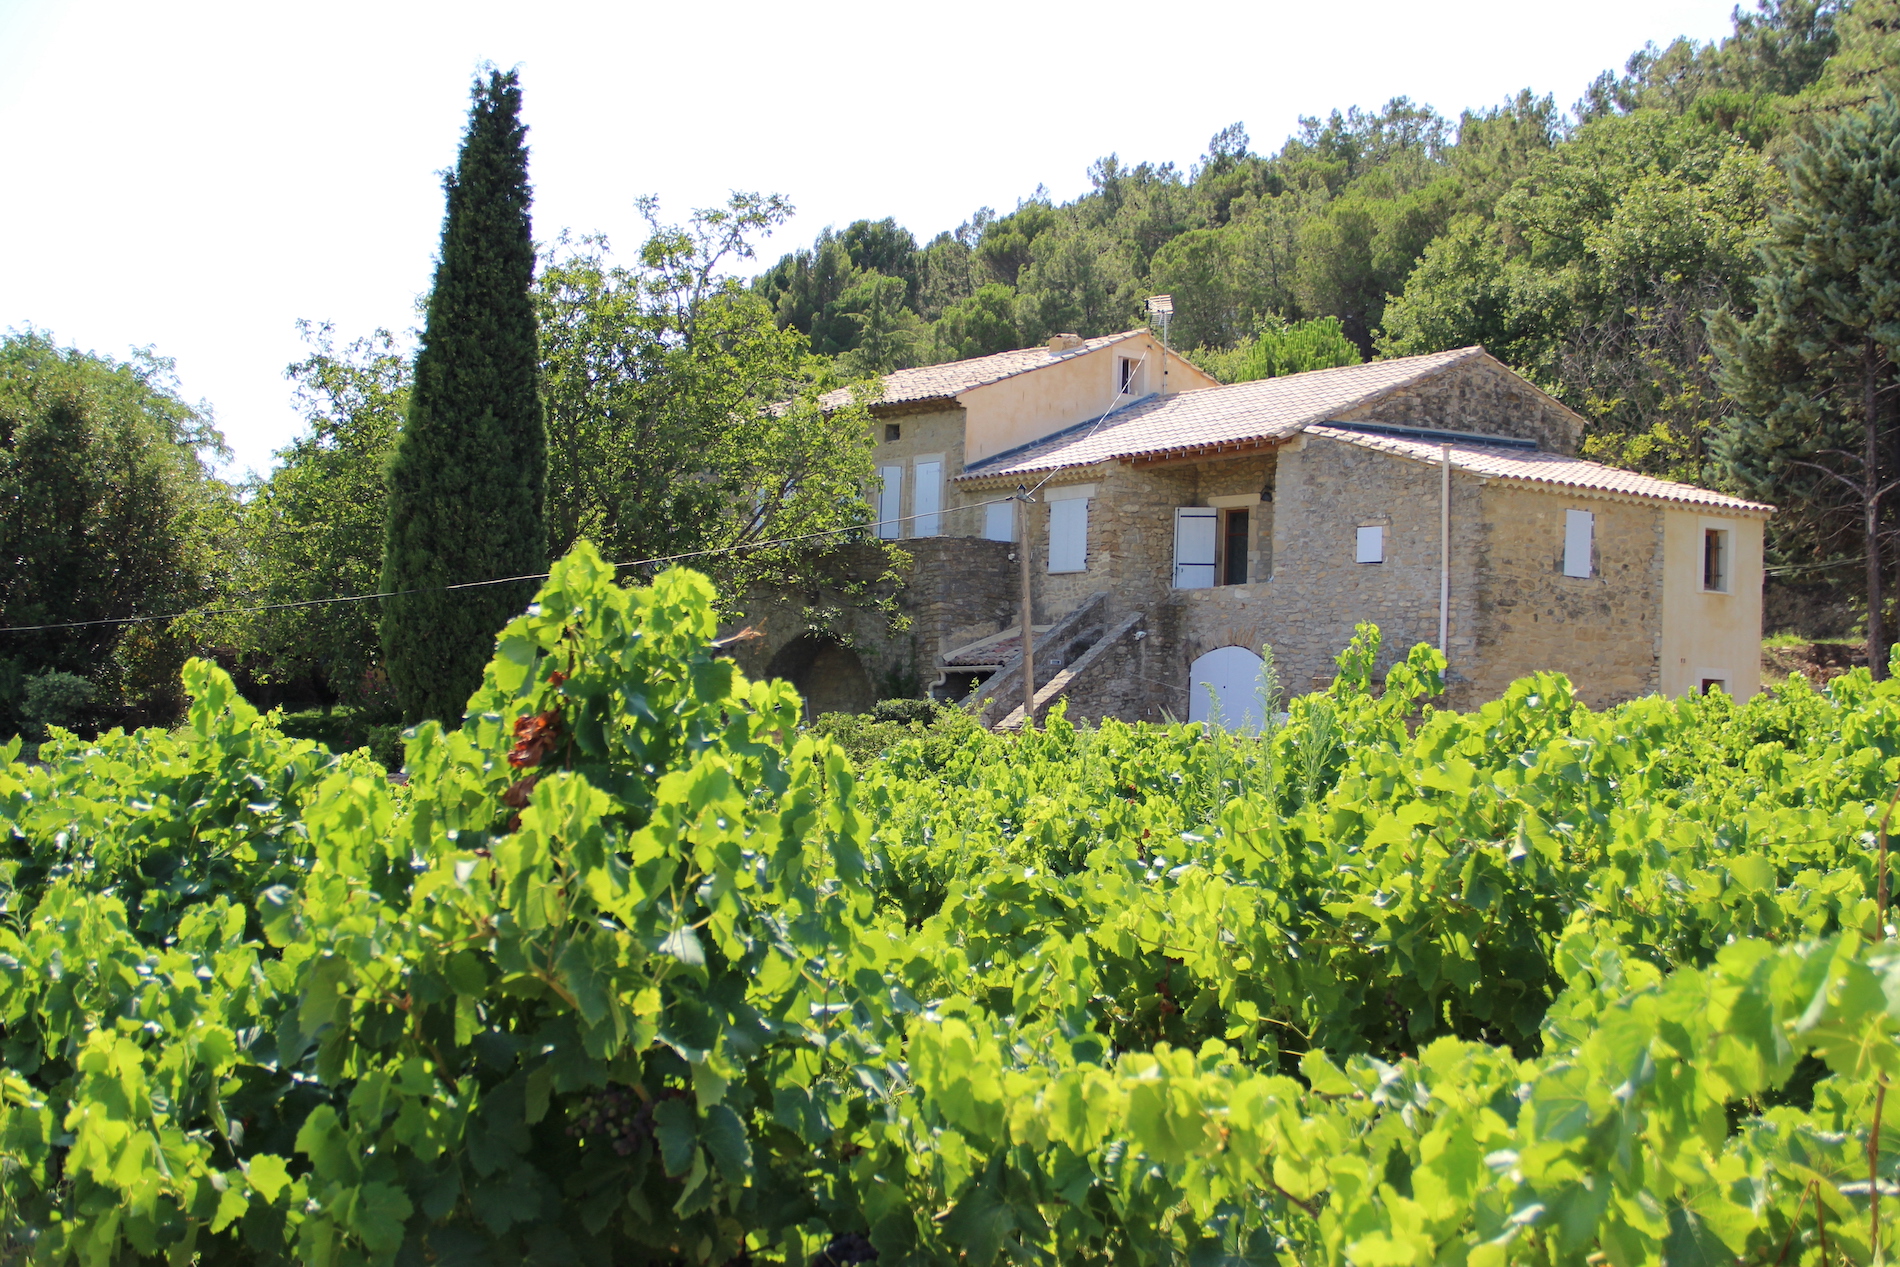 96795 : Uzès 25 minutes, beautiful Mas completely renovated, 300m2 of living space, 8 bedrooms, swimming pool, panoramic view on 3,5 acres